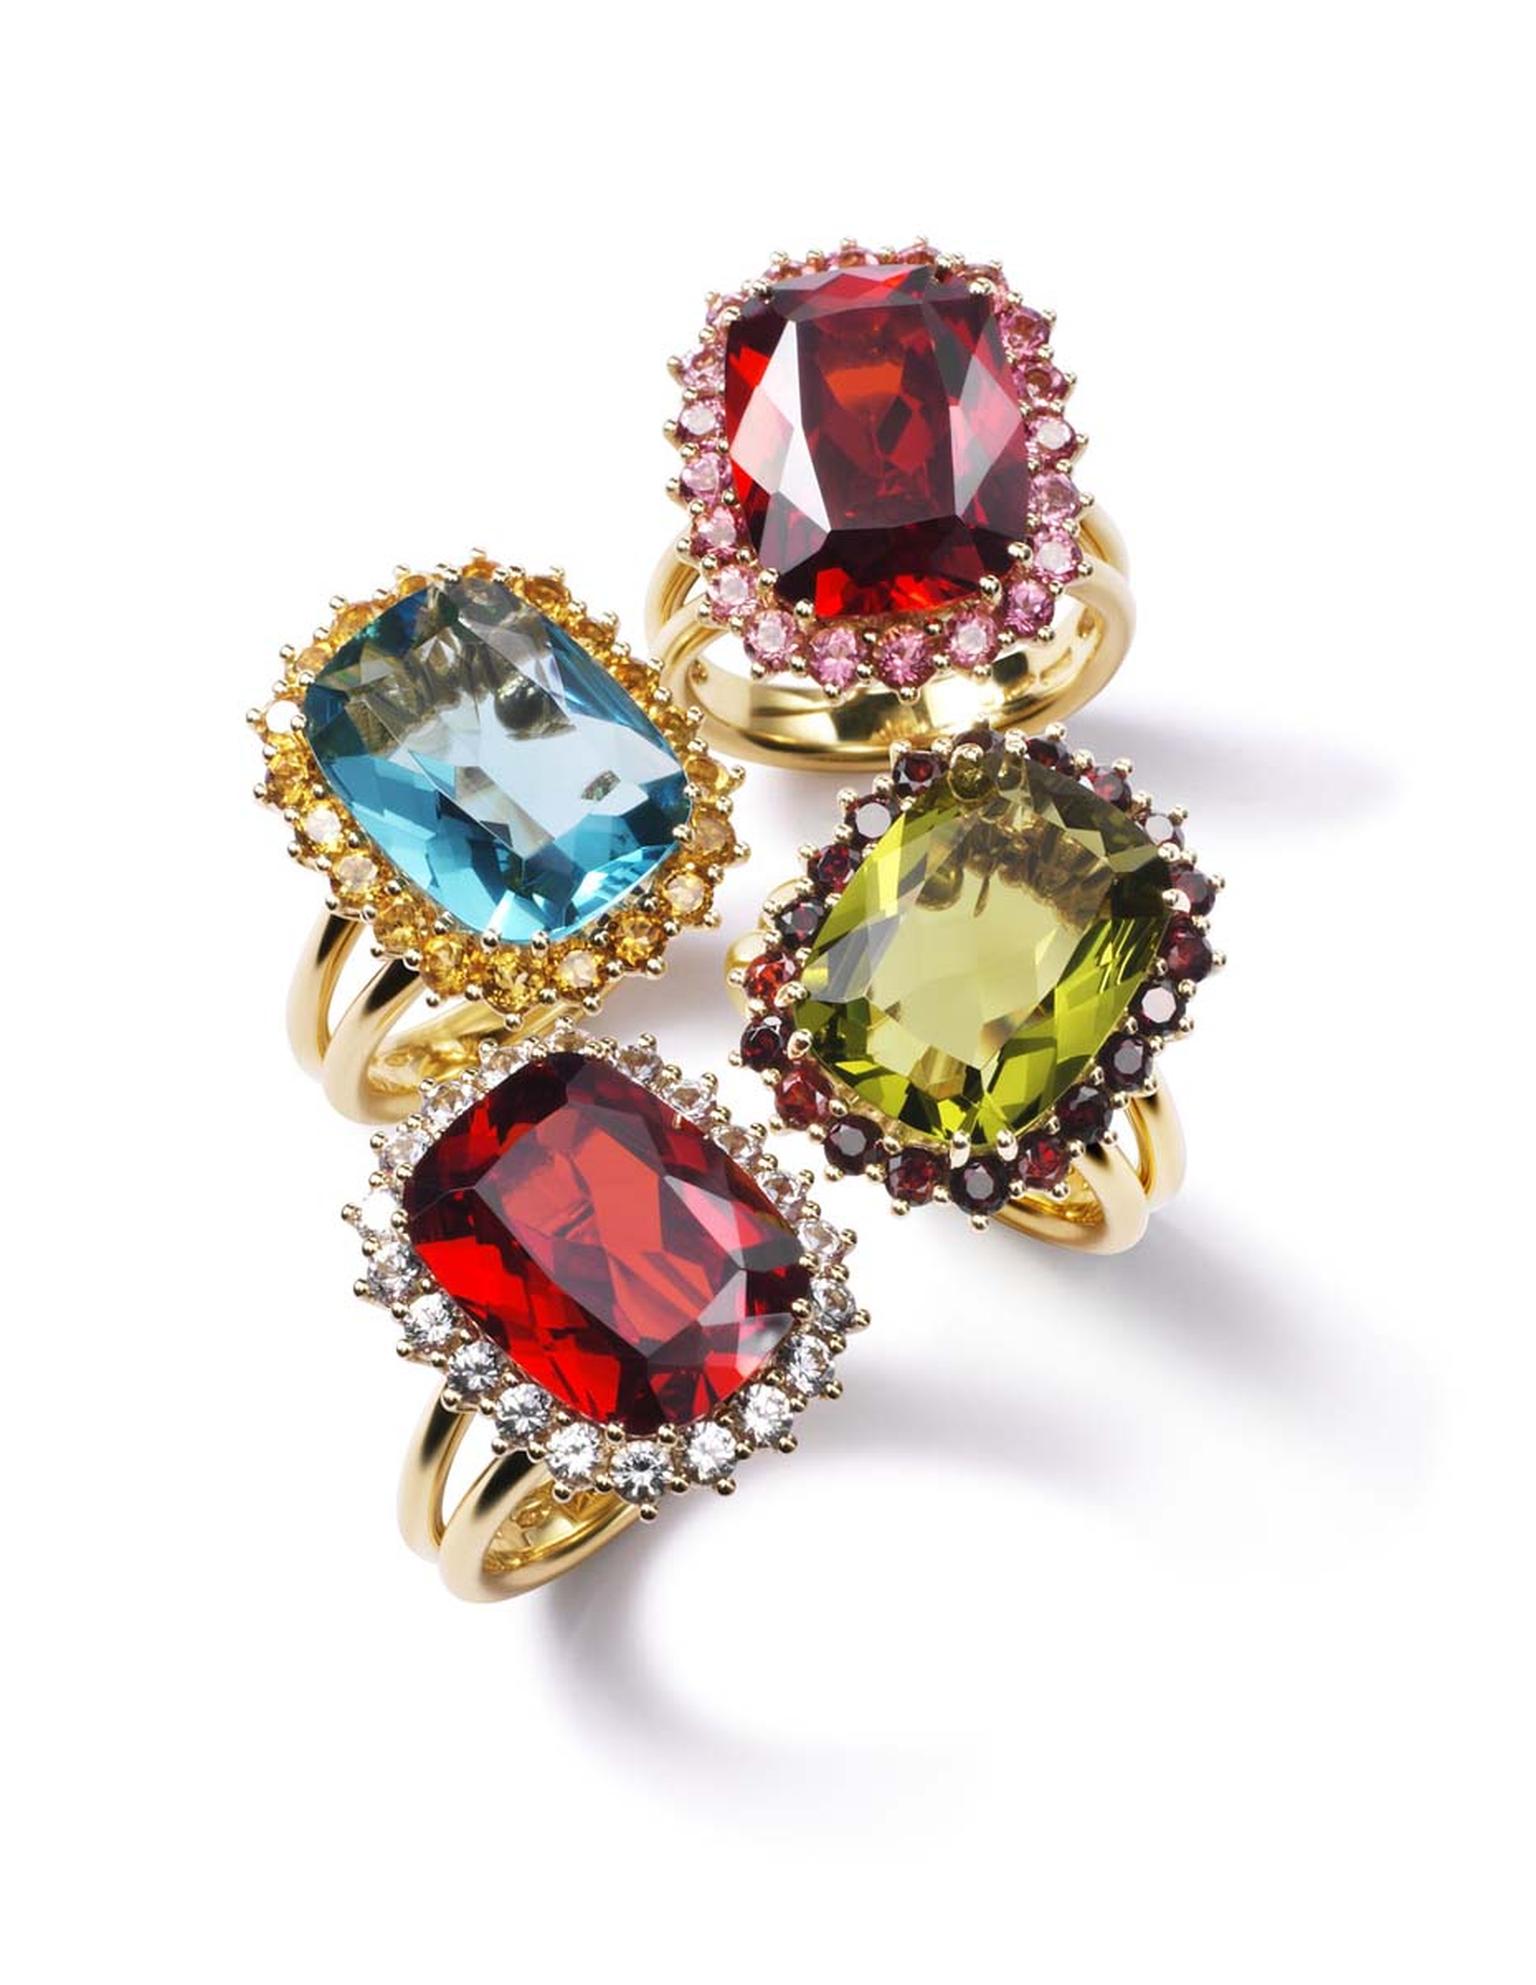 Dolce & Gabbana's colourful new collection of engagement rings (£POA).